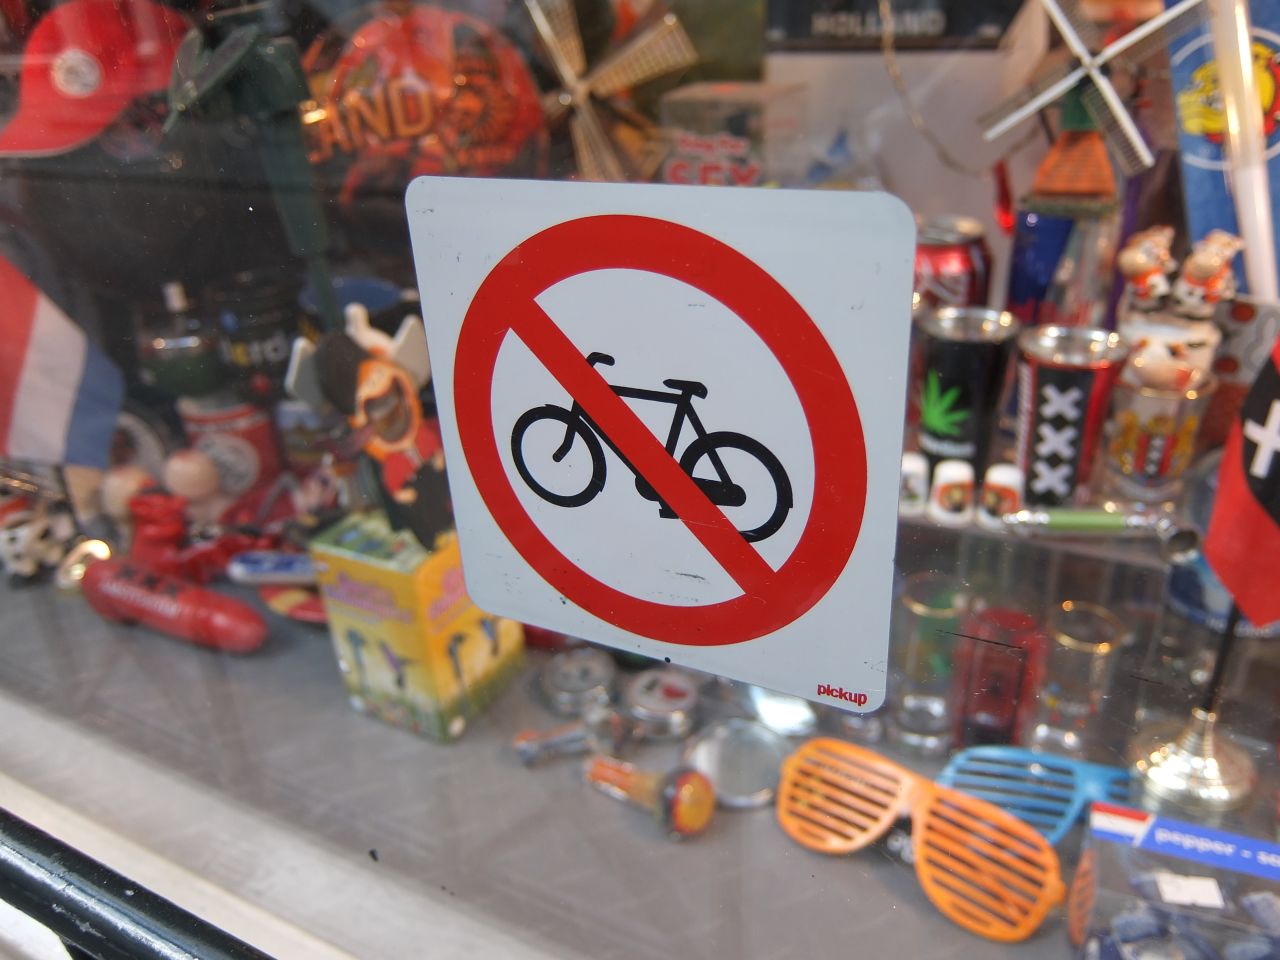 Two wheels bad: No parking sign for cyclists.